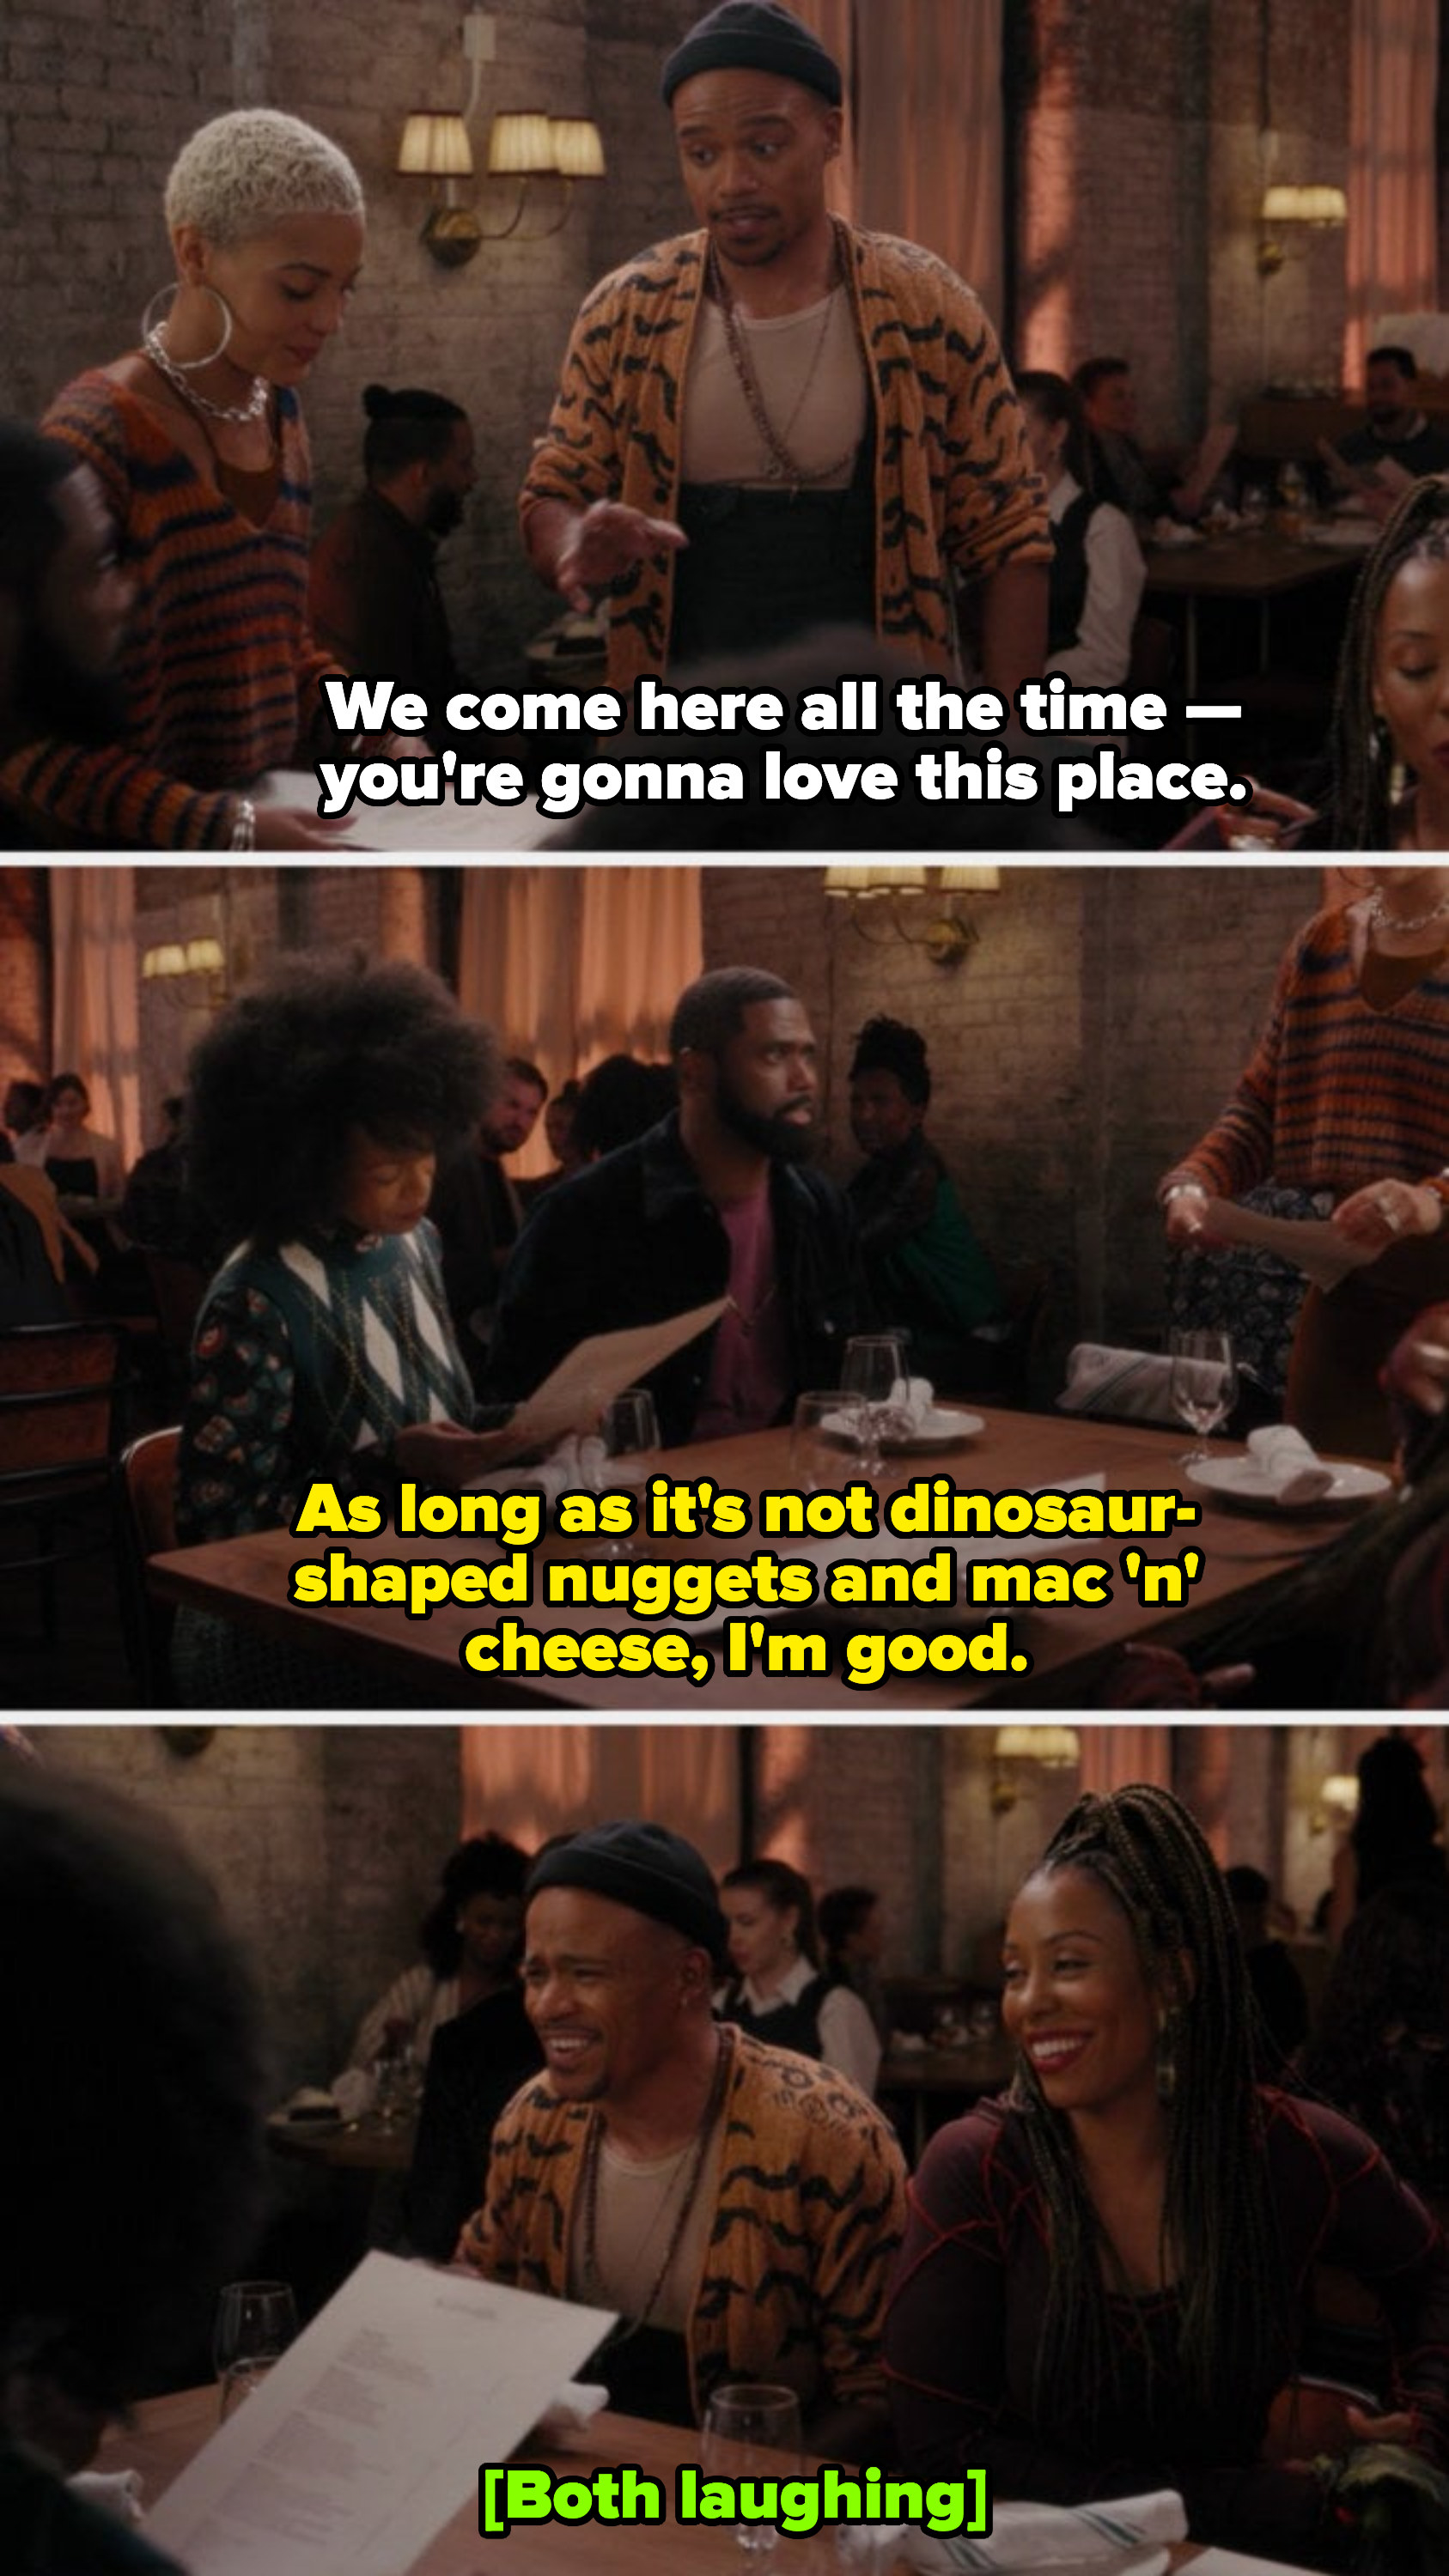 Andre: &quot;We come here all the time — you&#x27;re gonna love this place&quot; Andre&#x27;s friend: &quot;As long as it&#x27;s not dinosaur-shaped nuggets and mac &#x27;n&#x27; cheese, I&#x27;m good&quot;